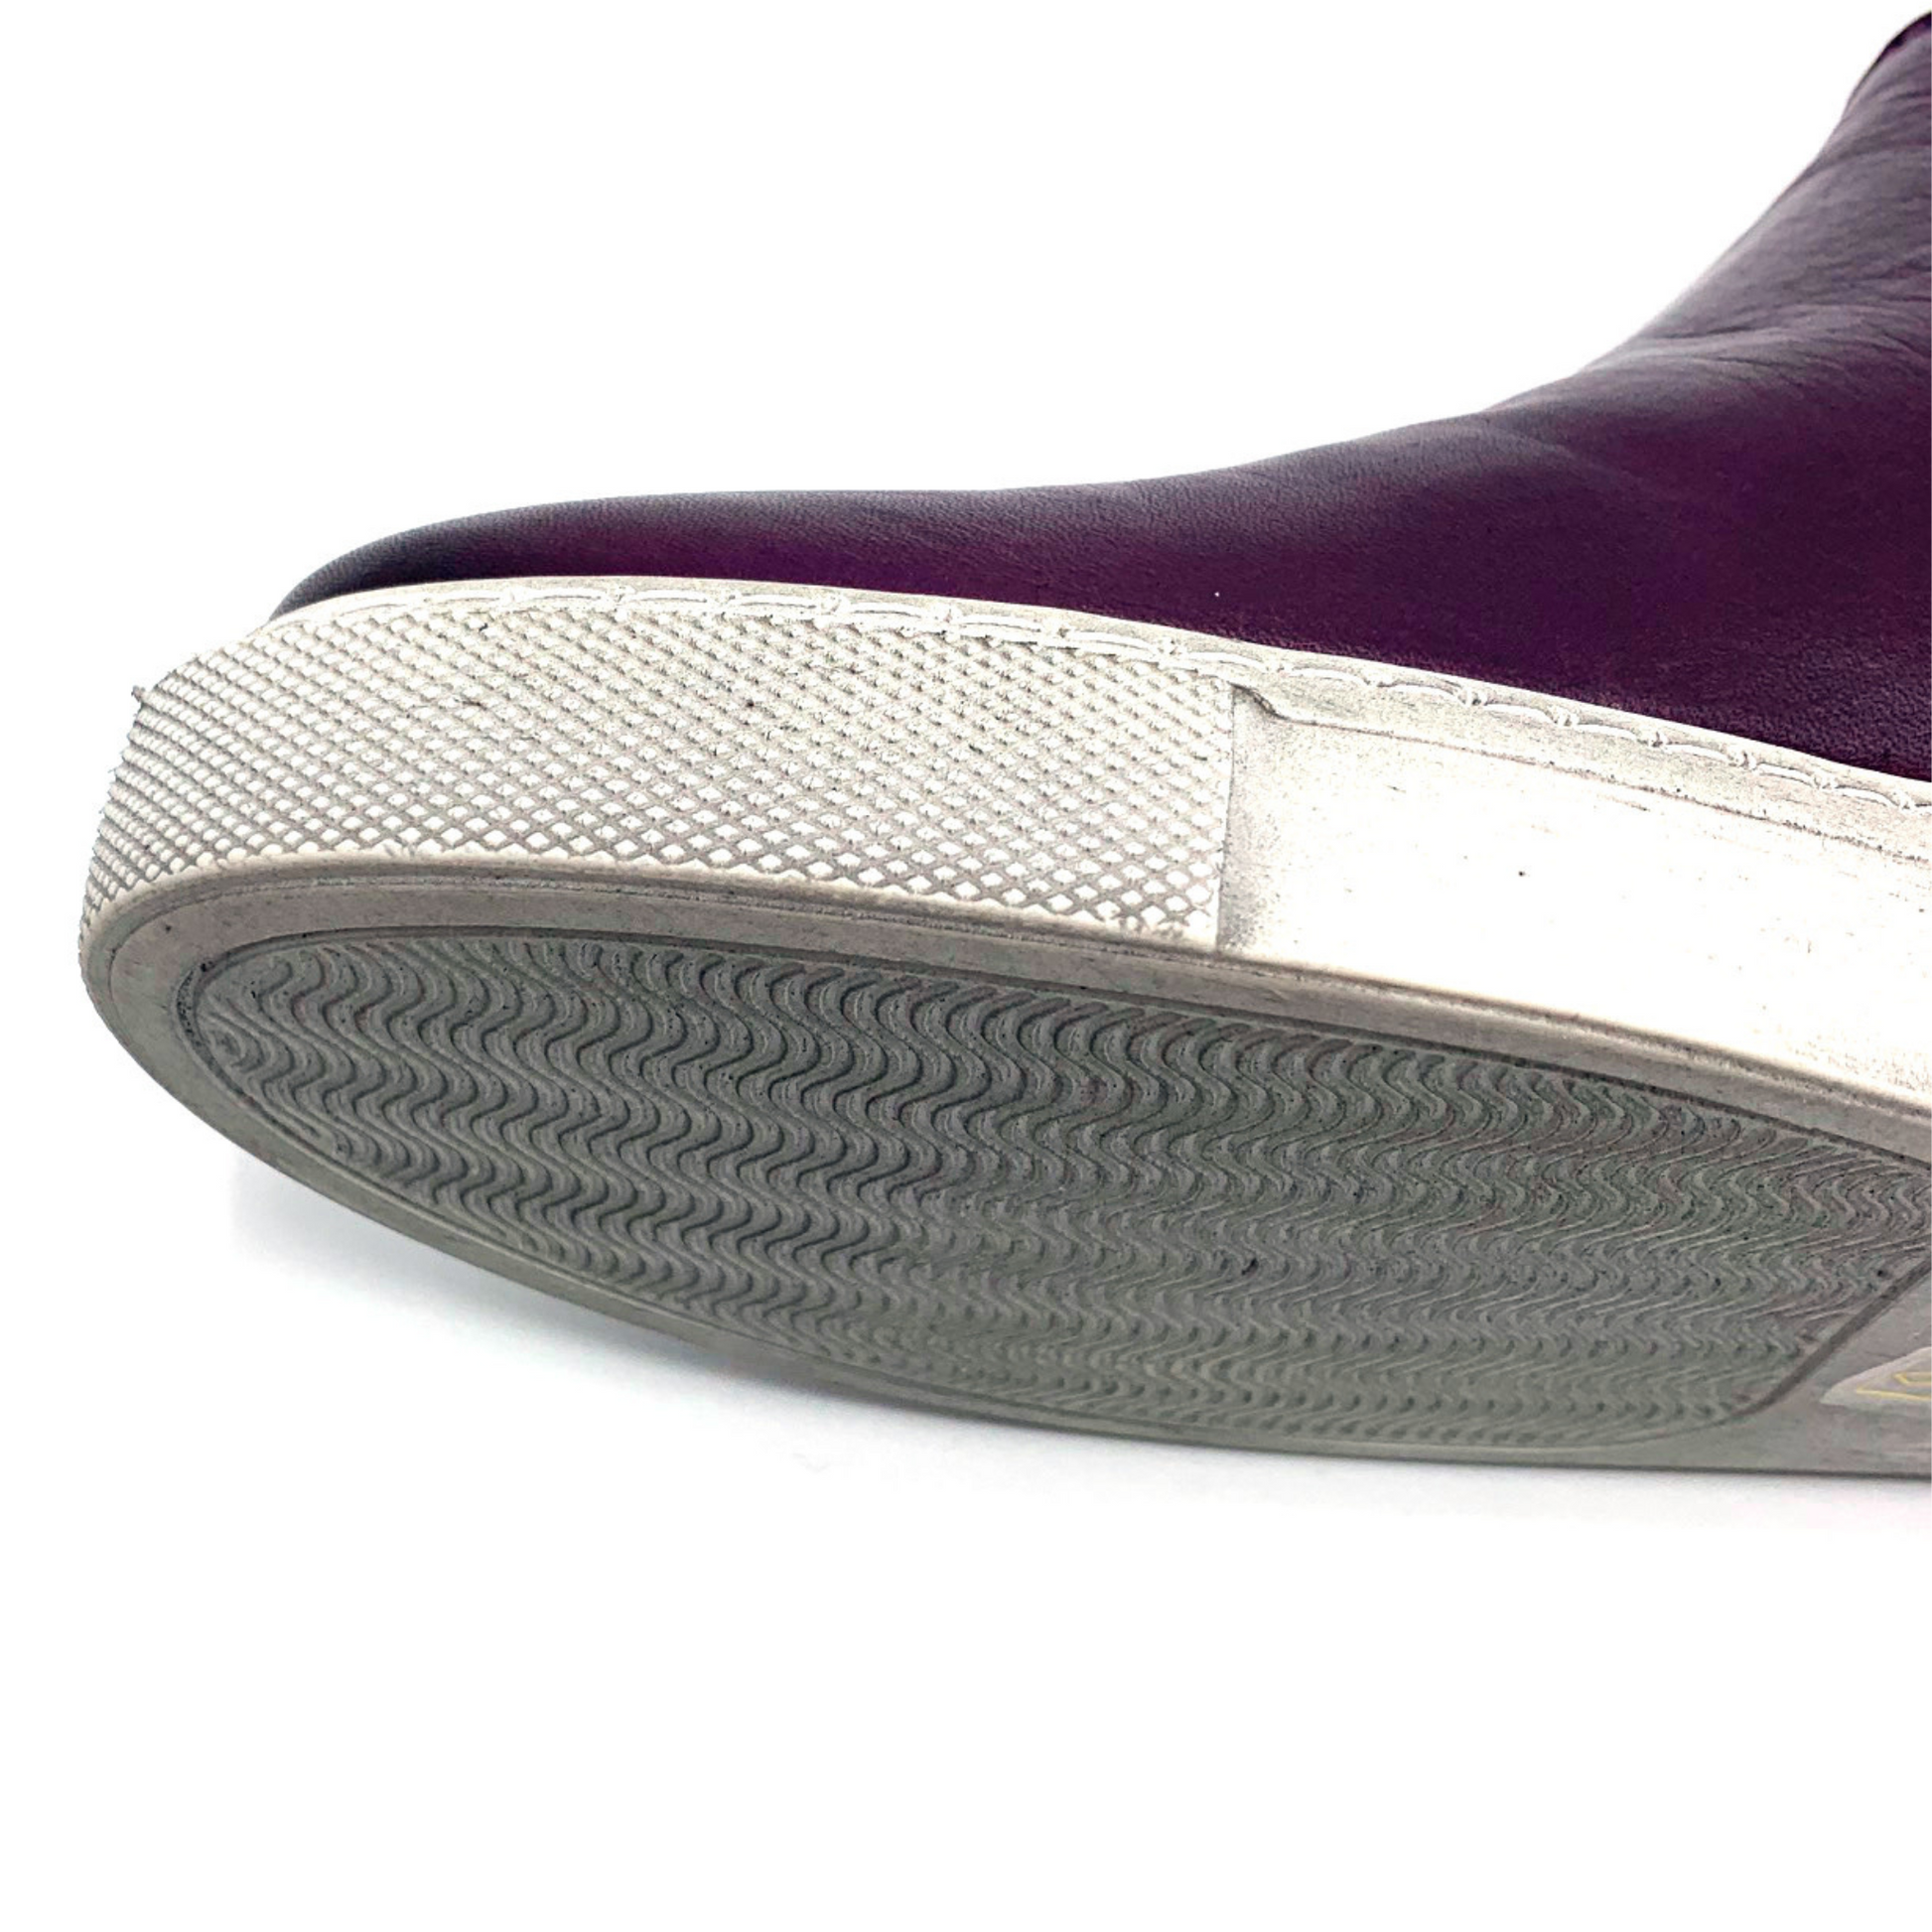 A detailed view shows a leather purple shoe with white outsole and a wavy tread.